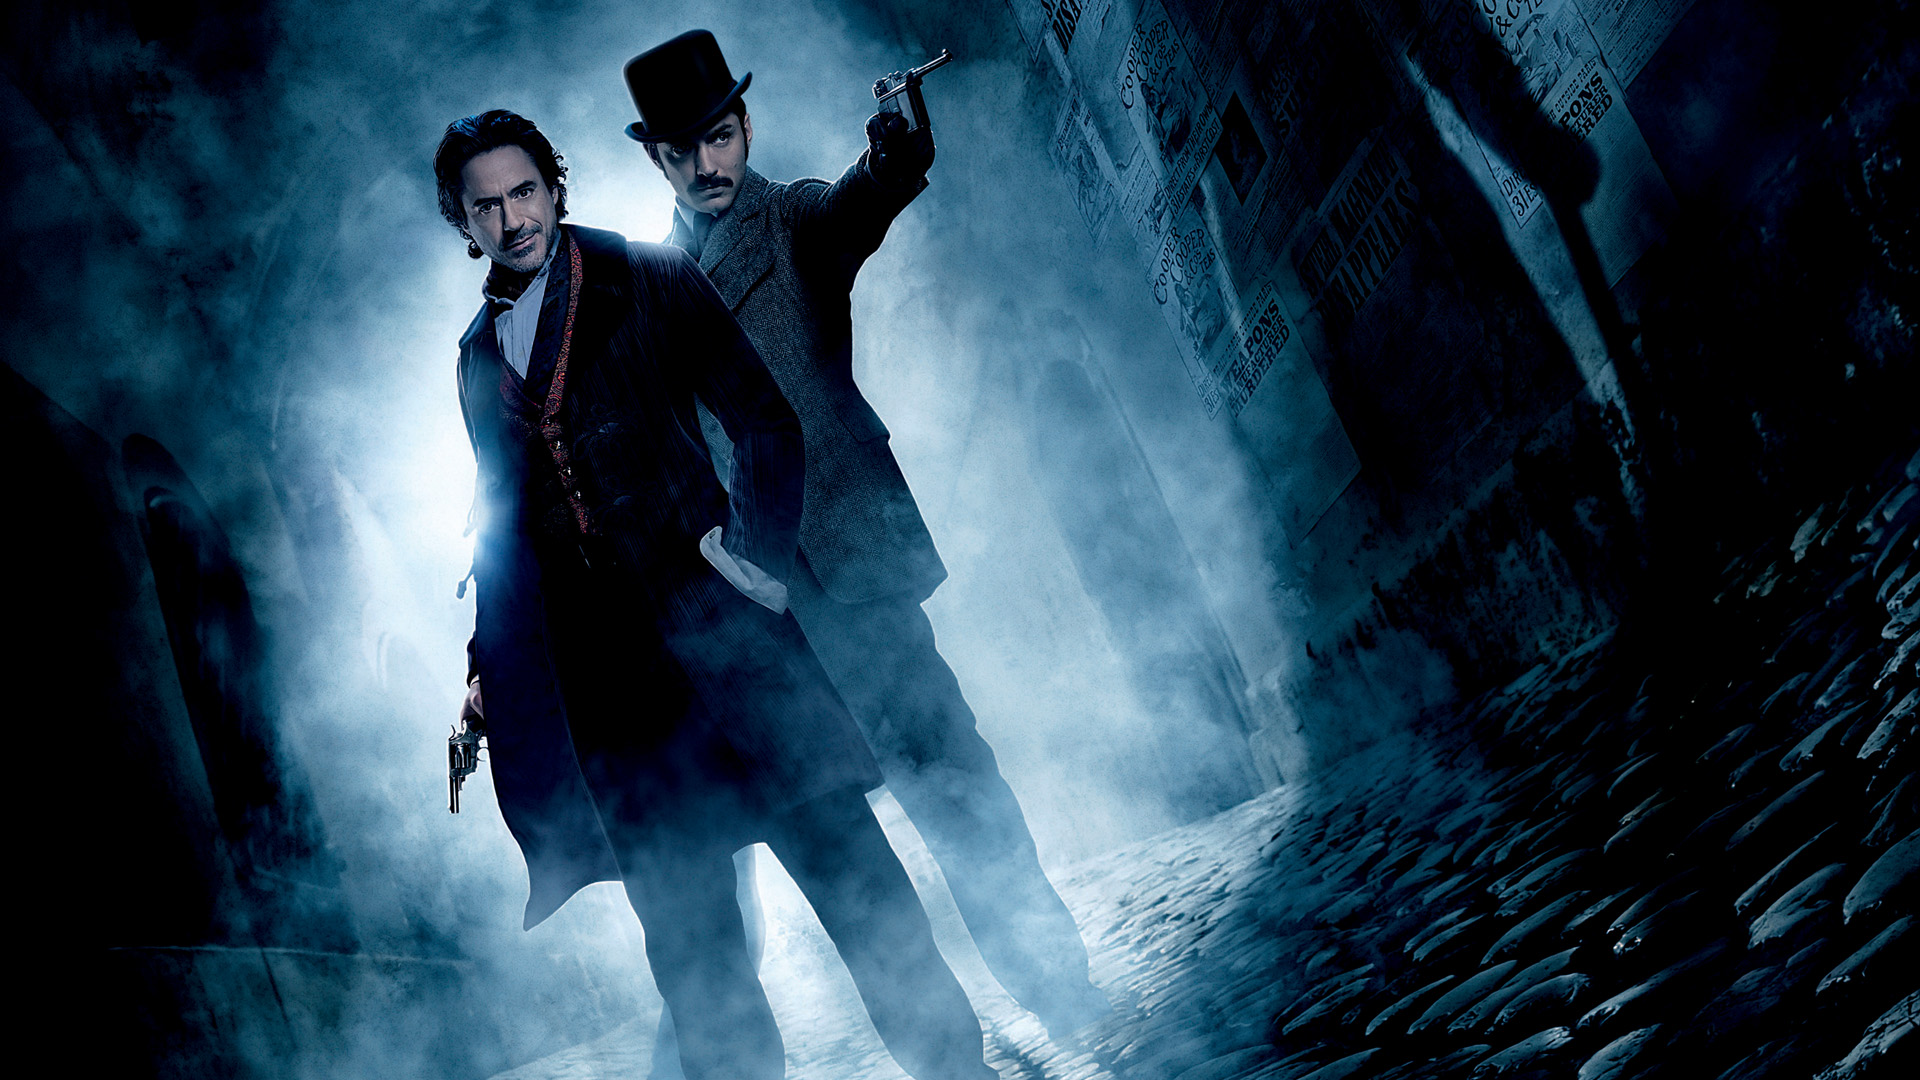 Movie Sherlock Holmes: A Game of Shadows HD Wallpaper | Background Image